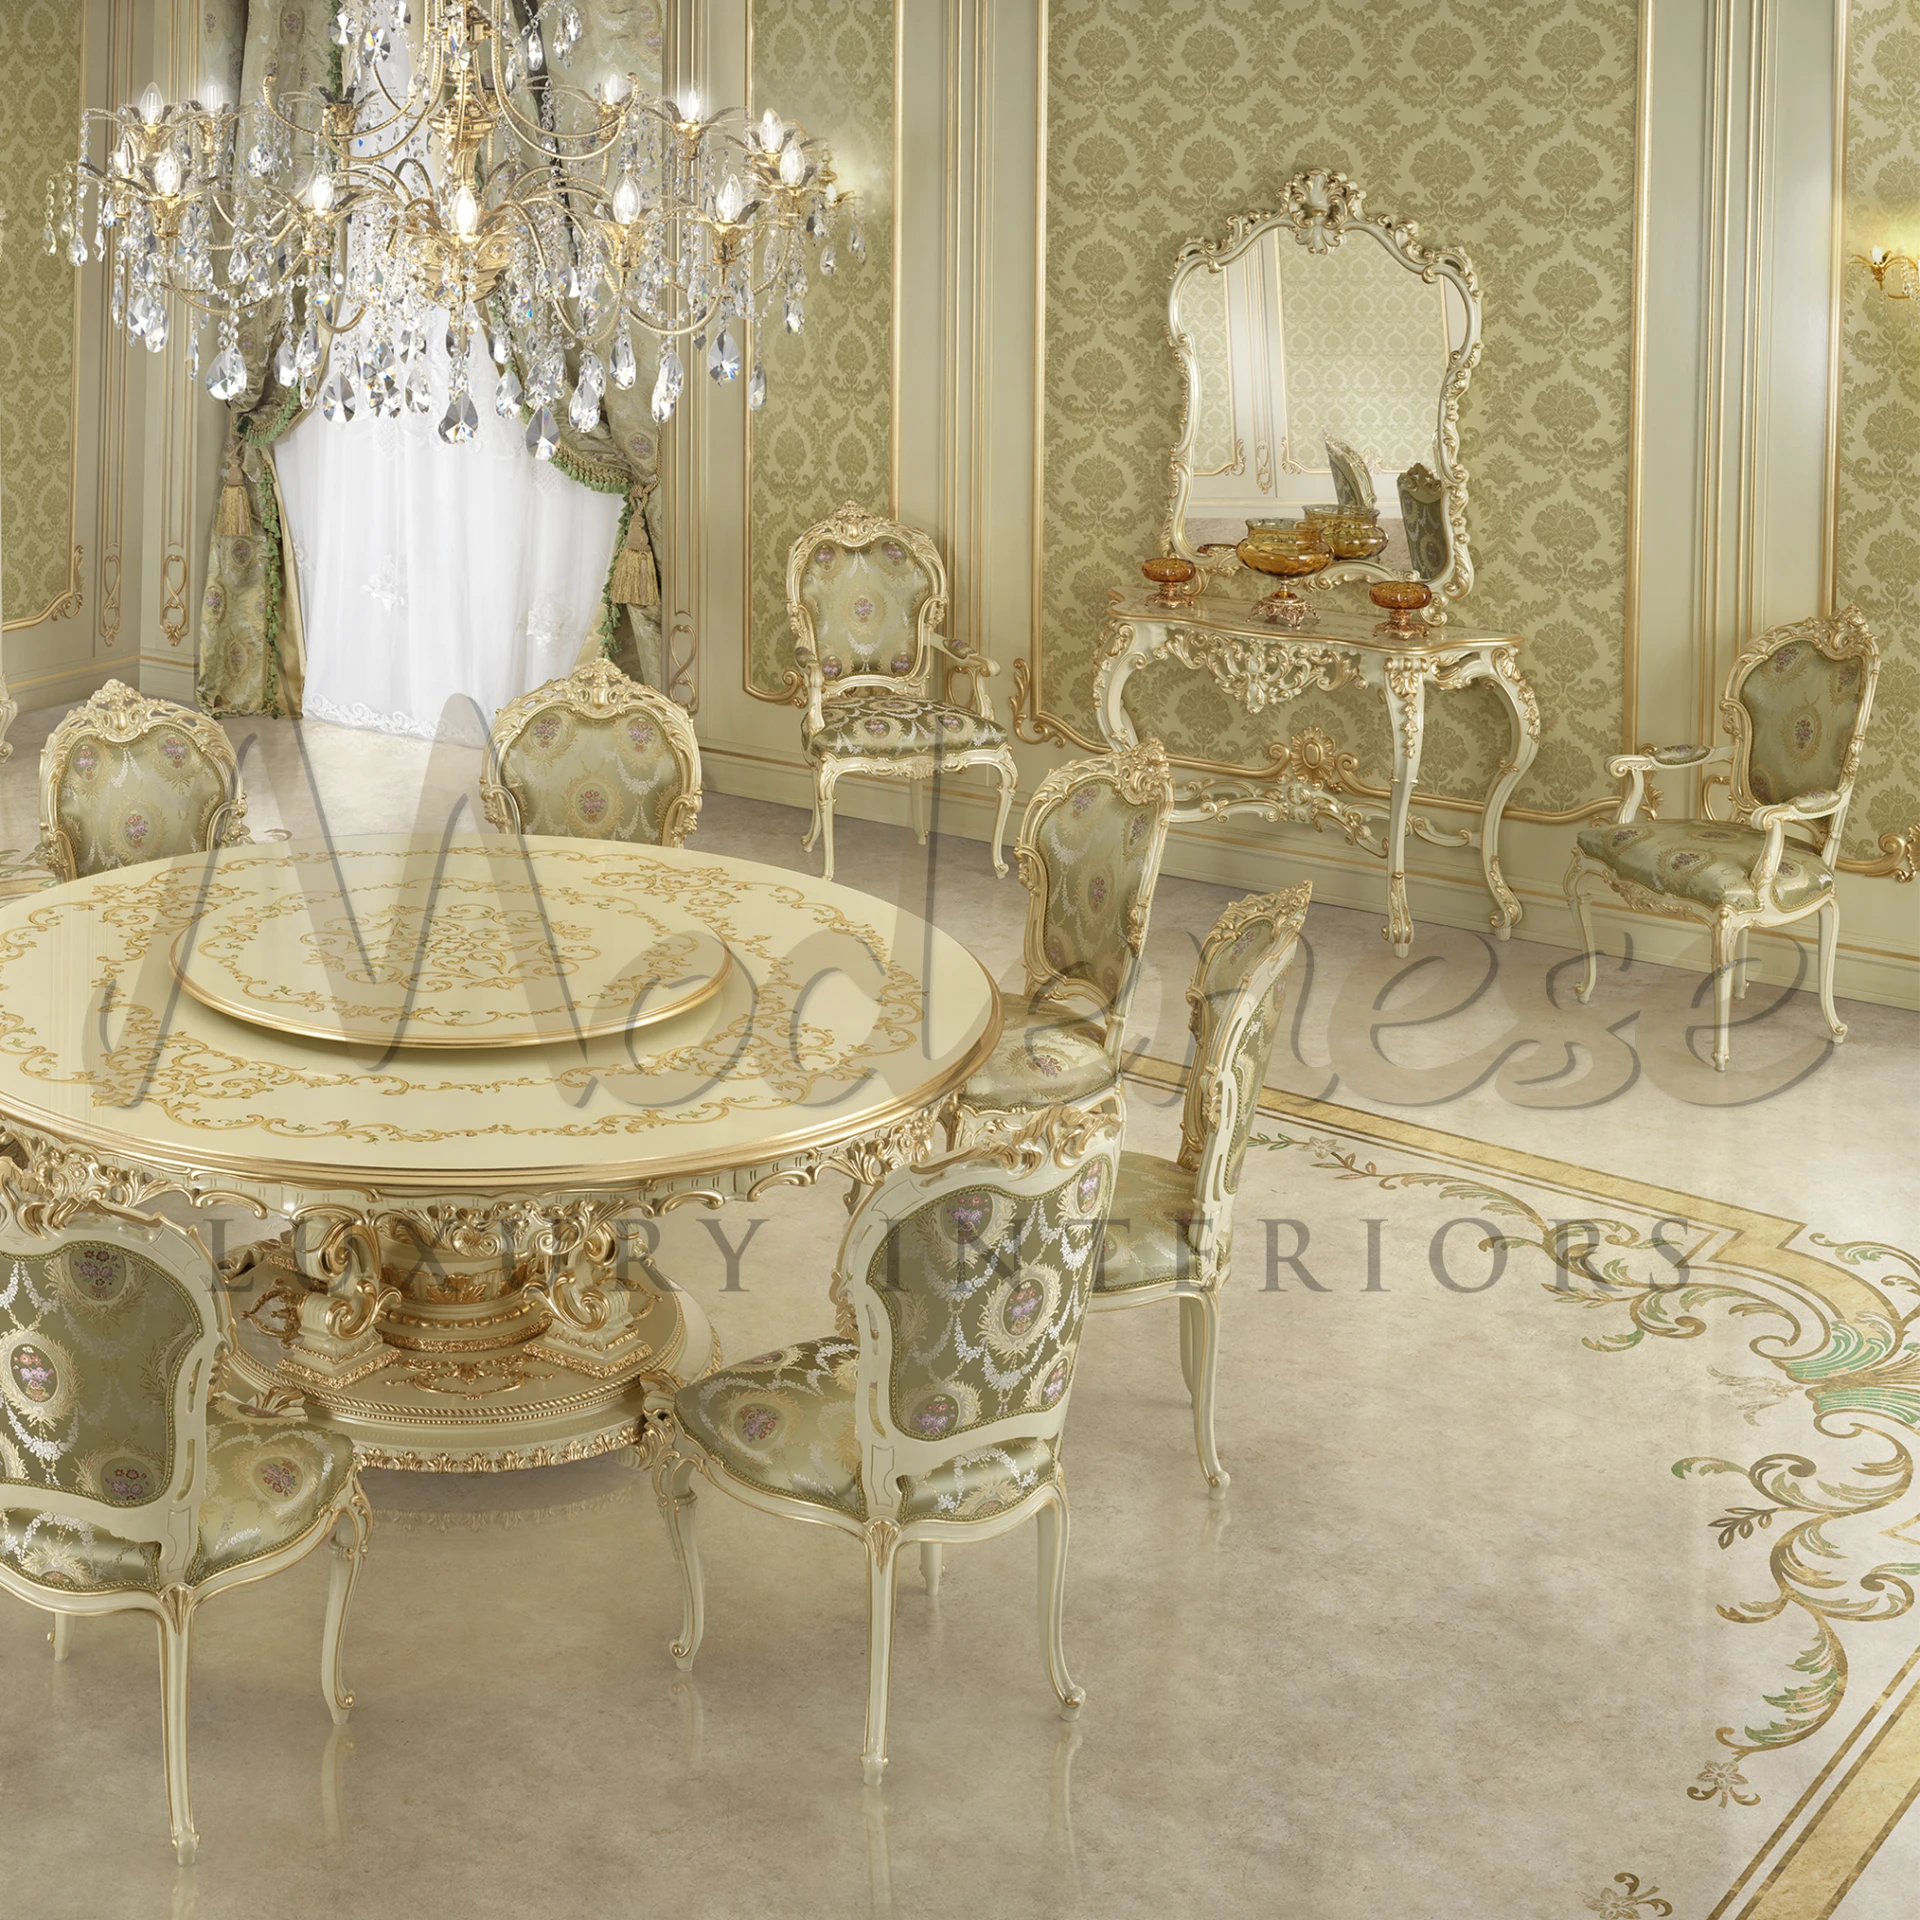 A luxurious room with crystal chandelier, a stylish round table surrounded by hand made Italian chairs, and elegant wall designs.